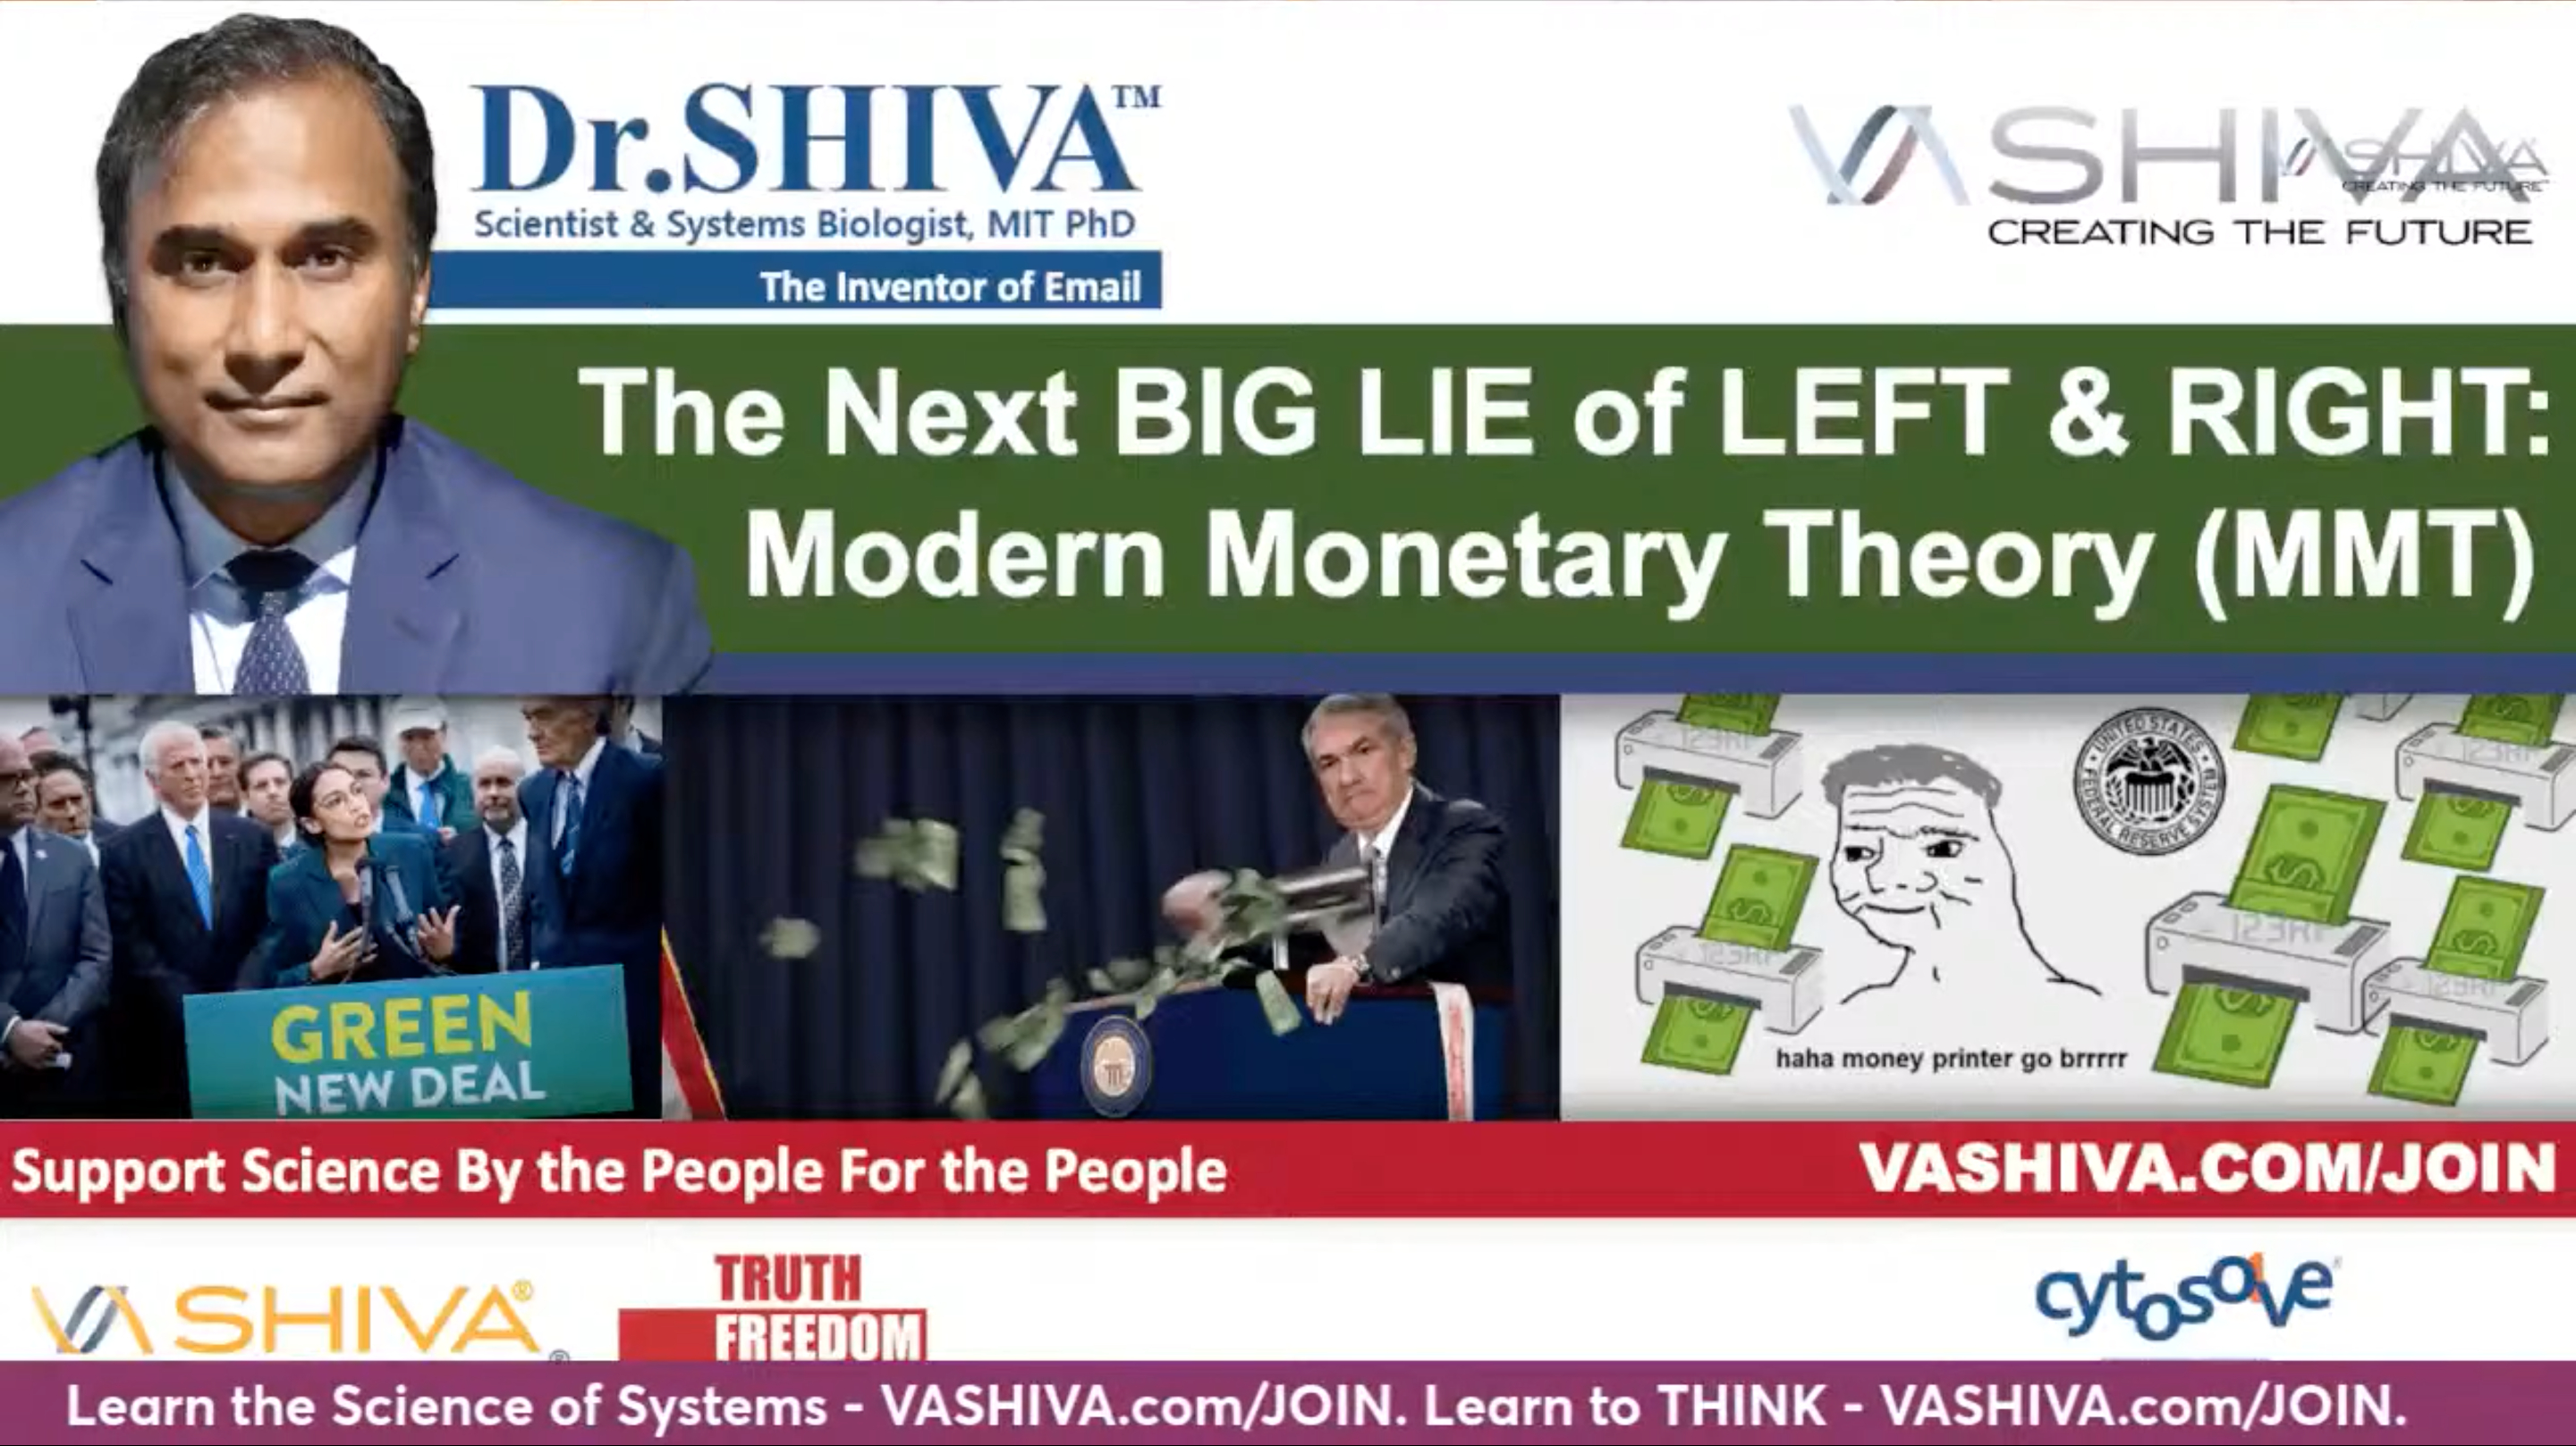 Dr.SHIVA LIVE: The Next BIG LIE of the LEFT & RIGHT: Modern Monetary Theory (MMT)